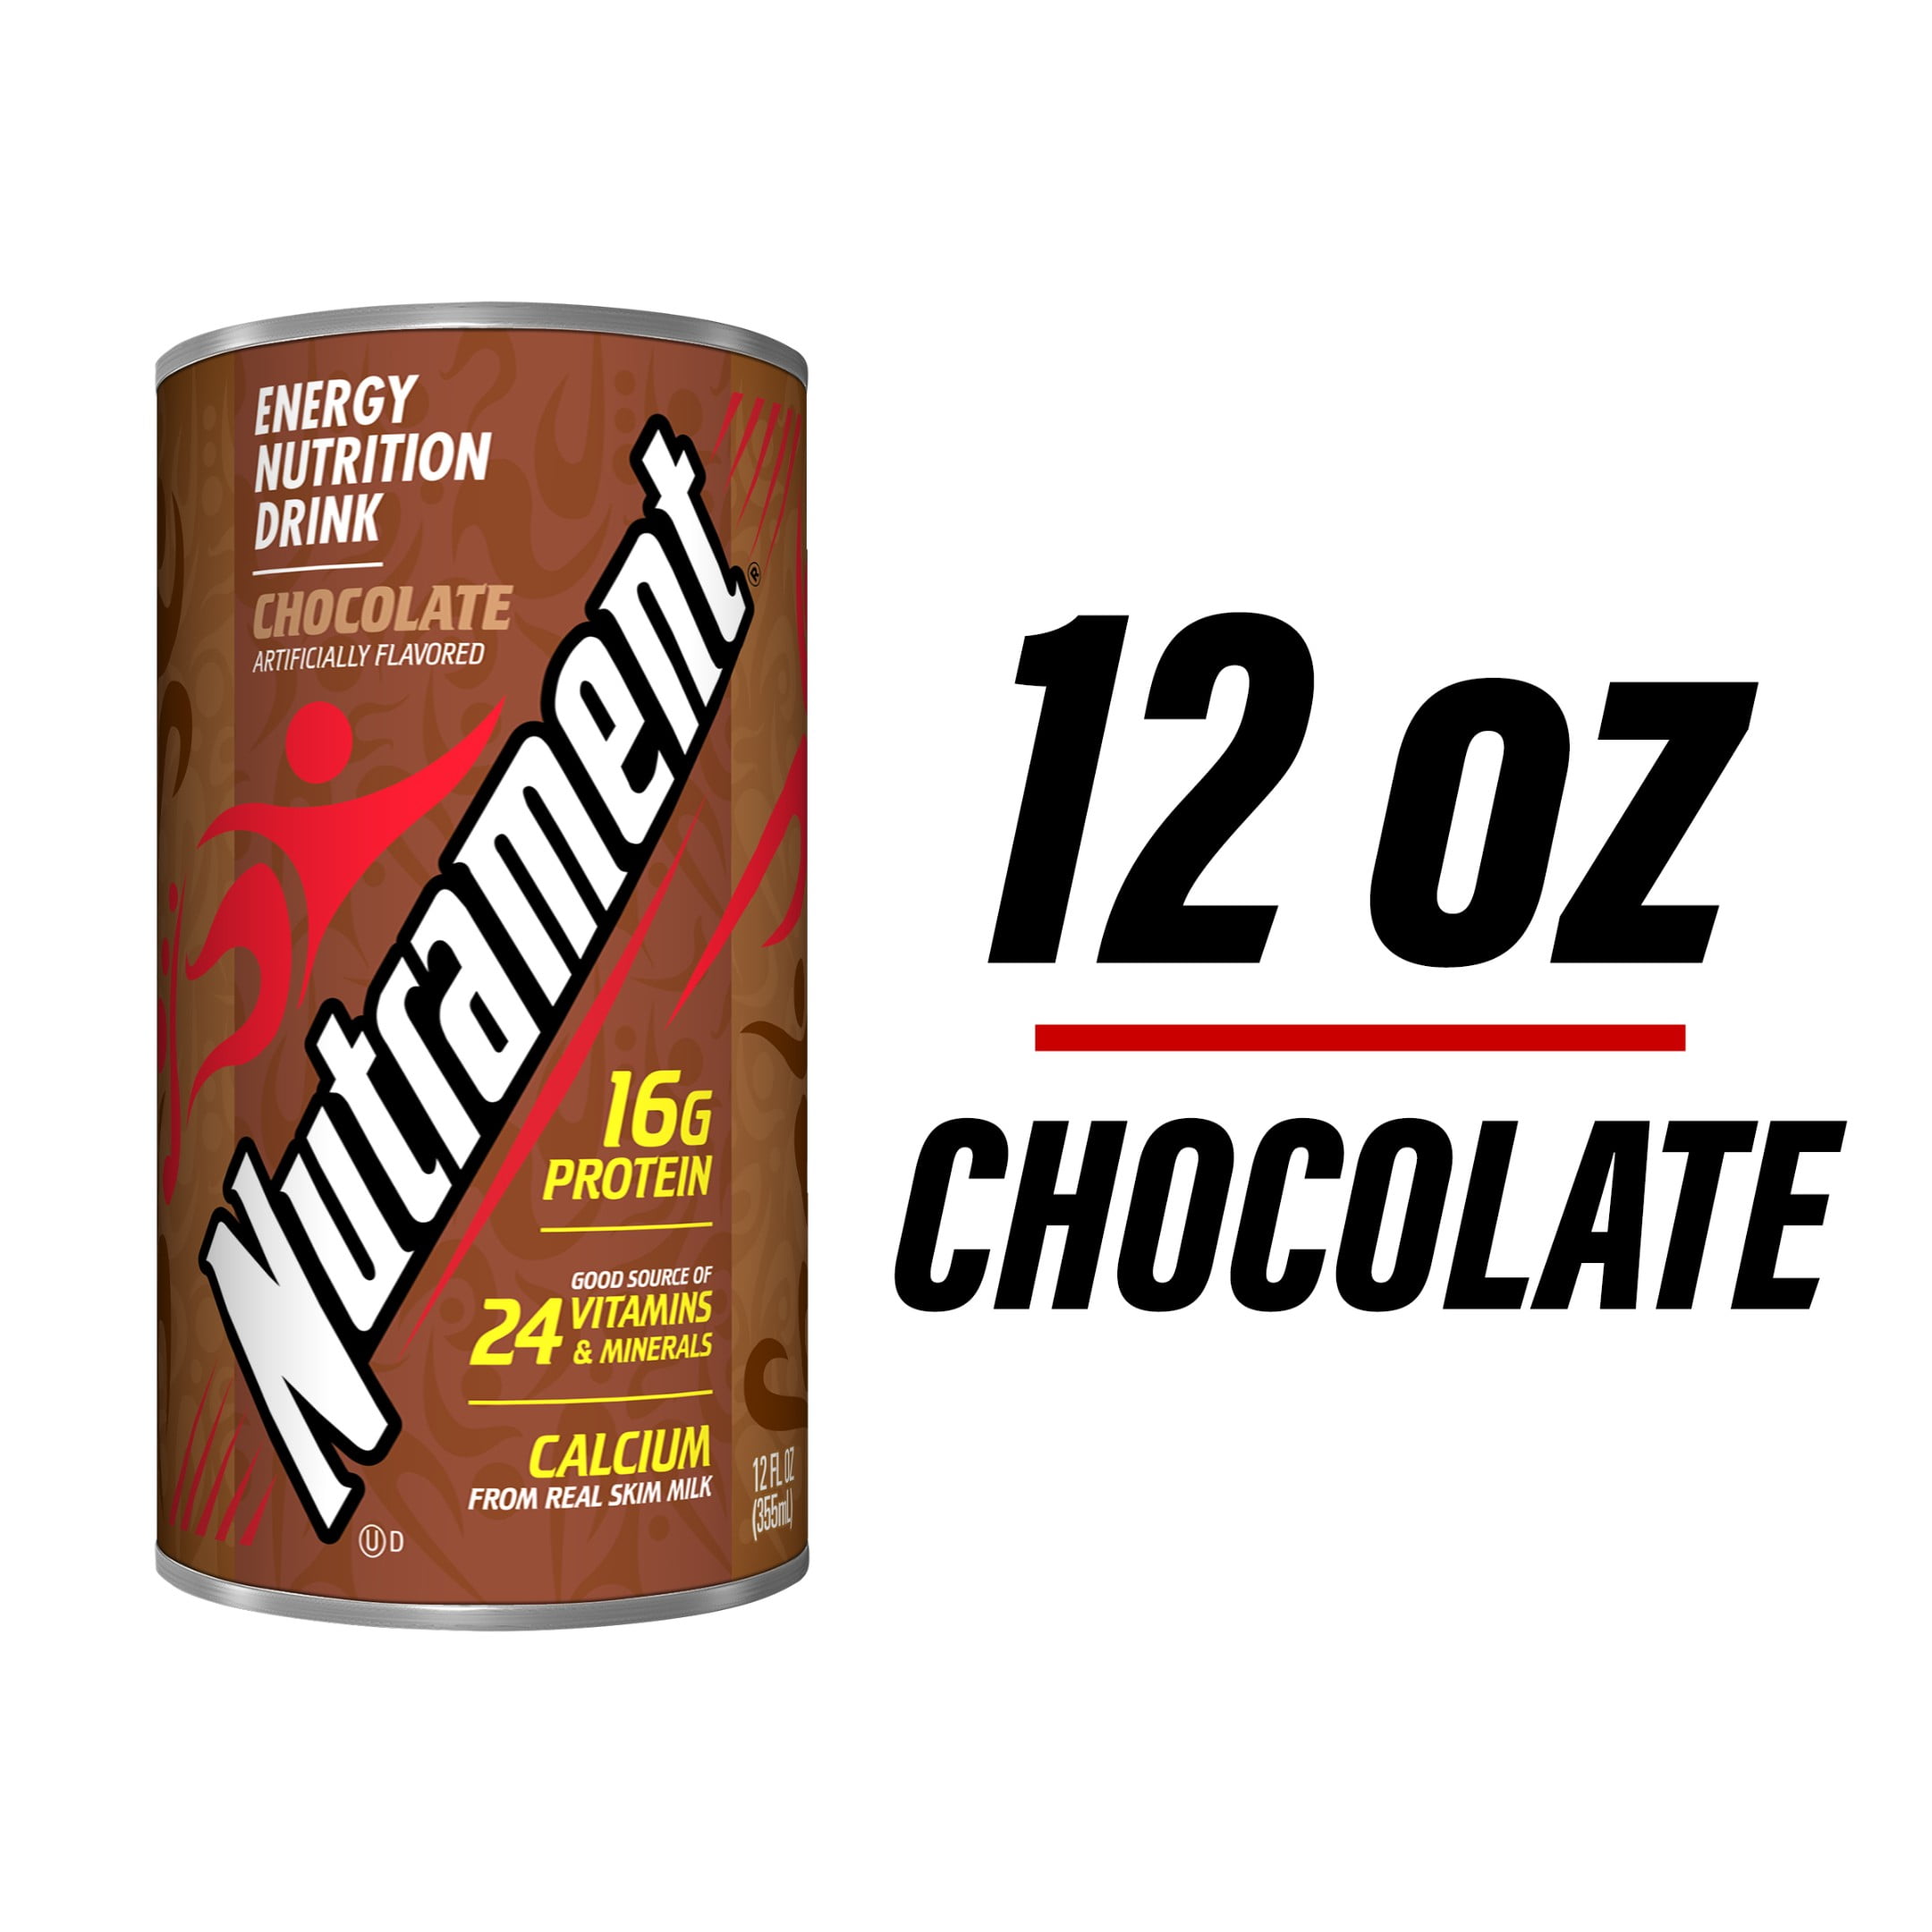 Nutrament Chocolate Nutrition Drink, Energy Drink with Vitamins, Minerals and Protein, 12 FL OZ